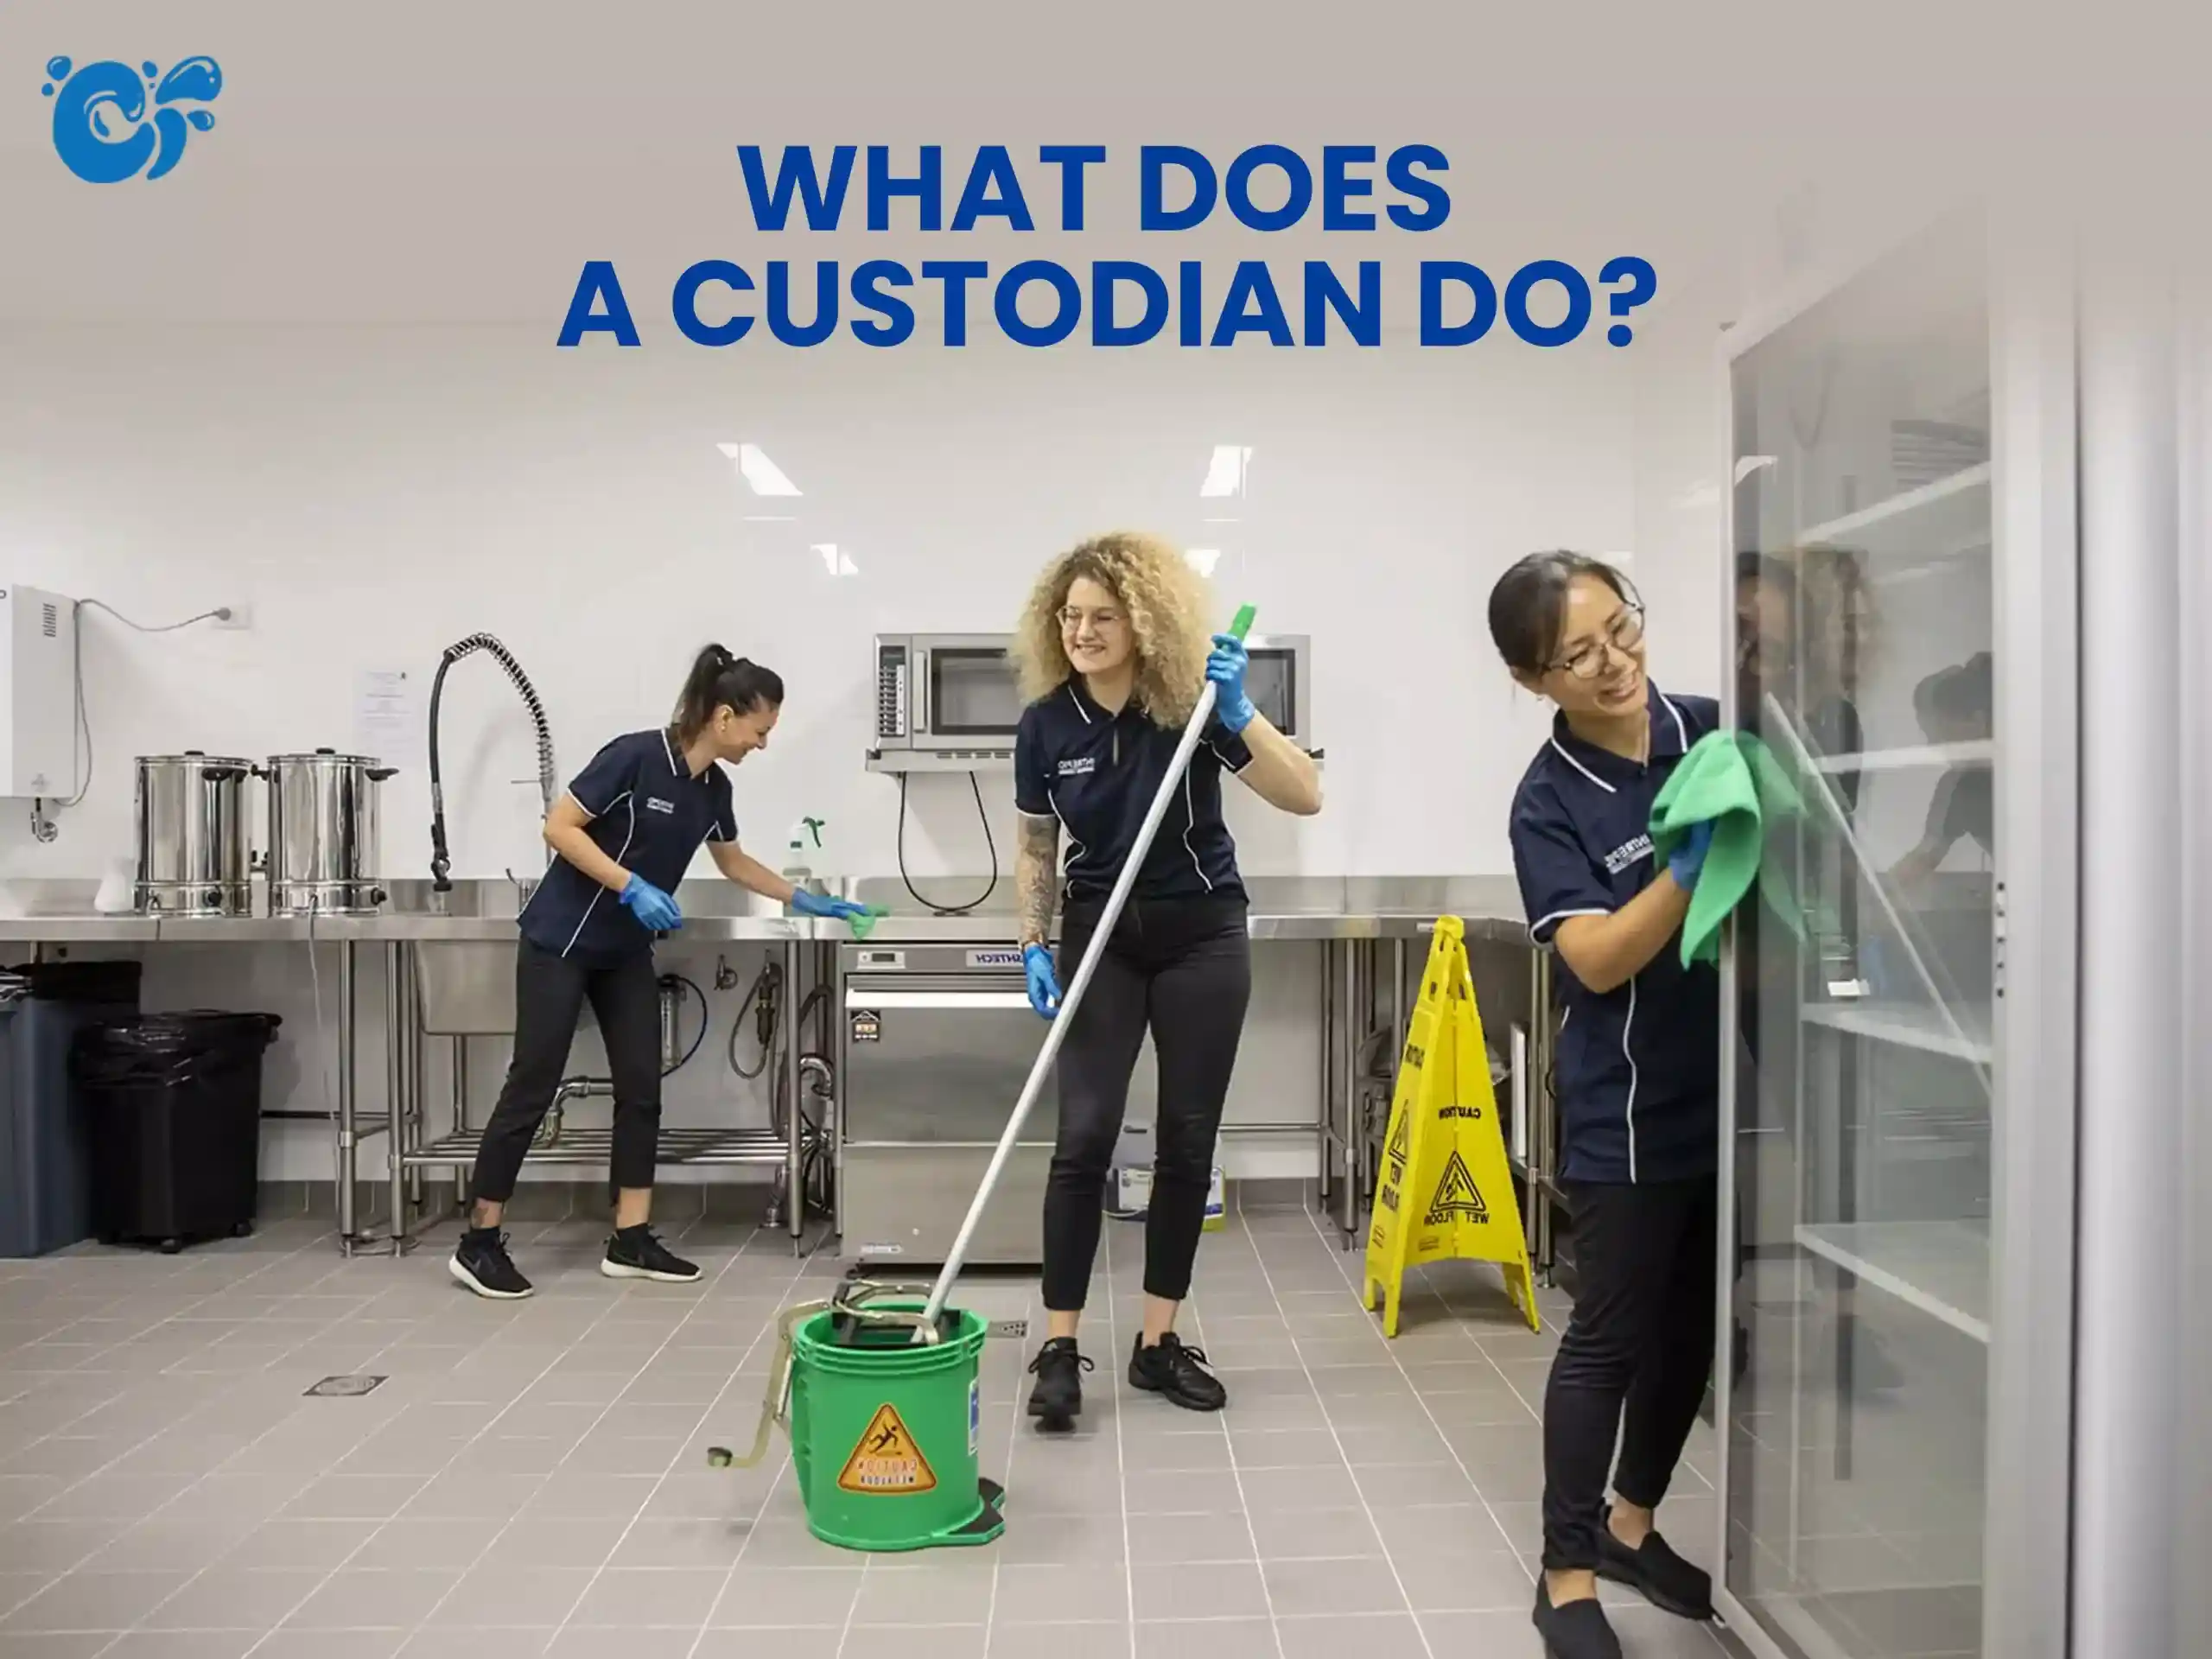 What Does a Custodian Do